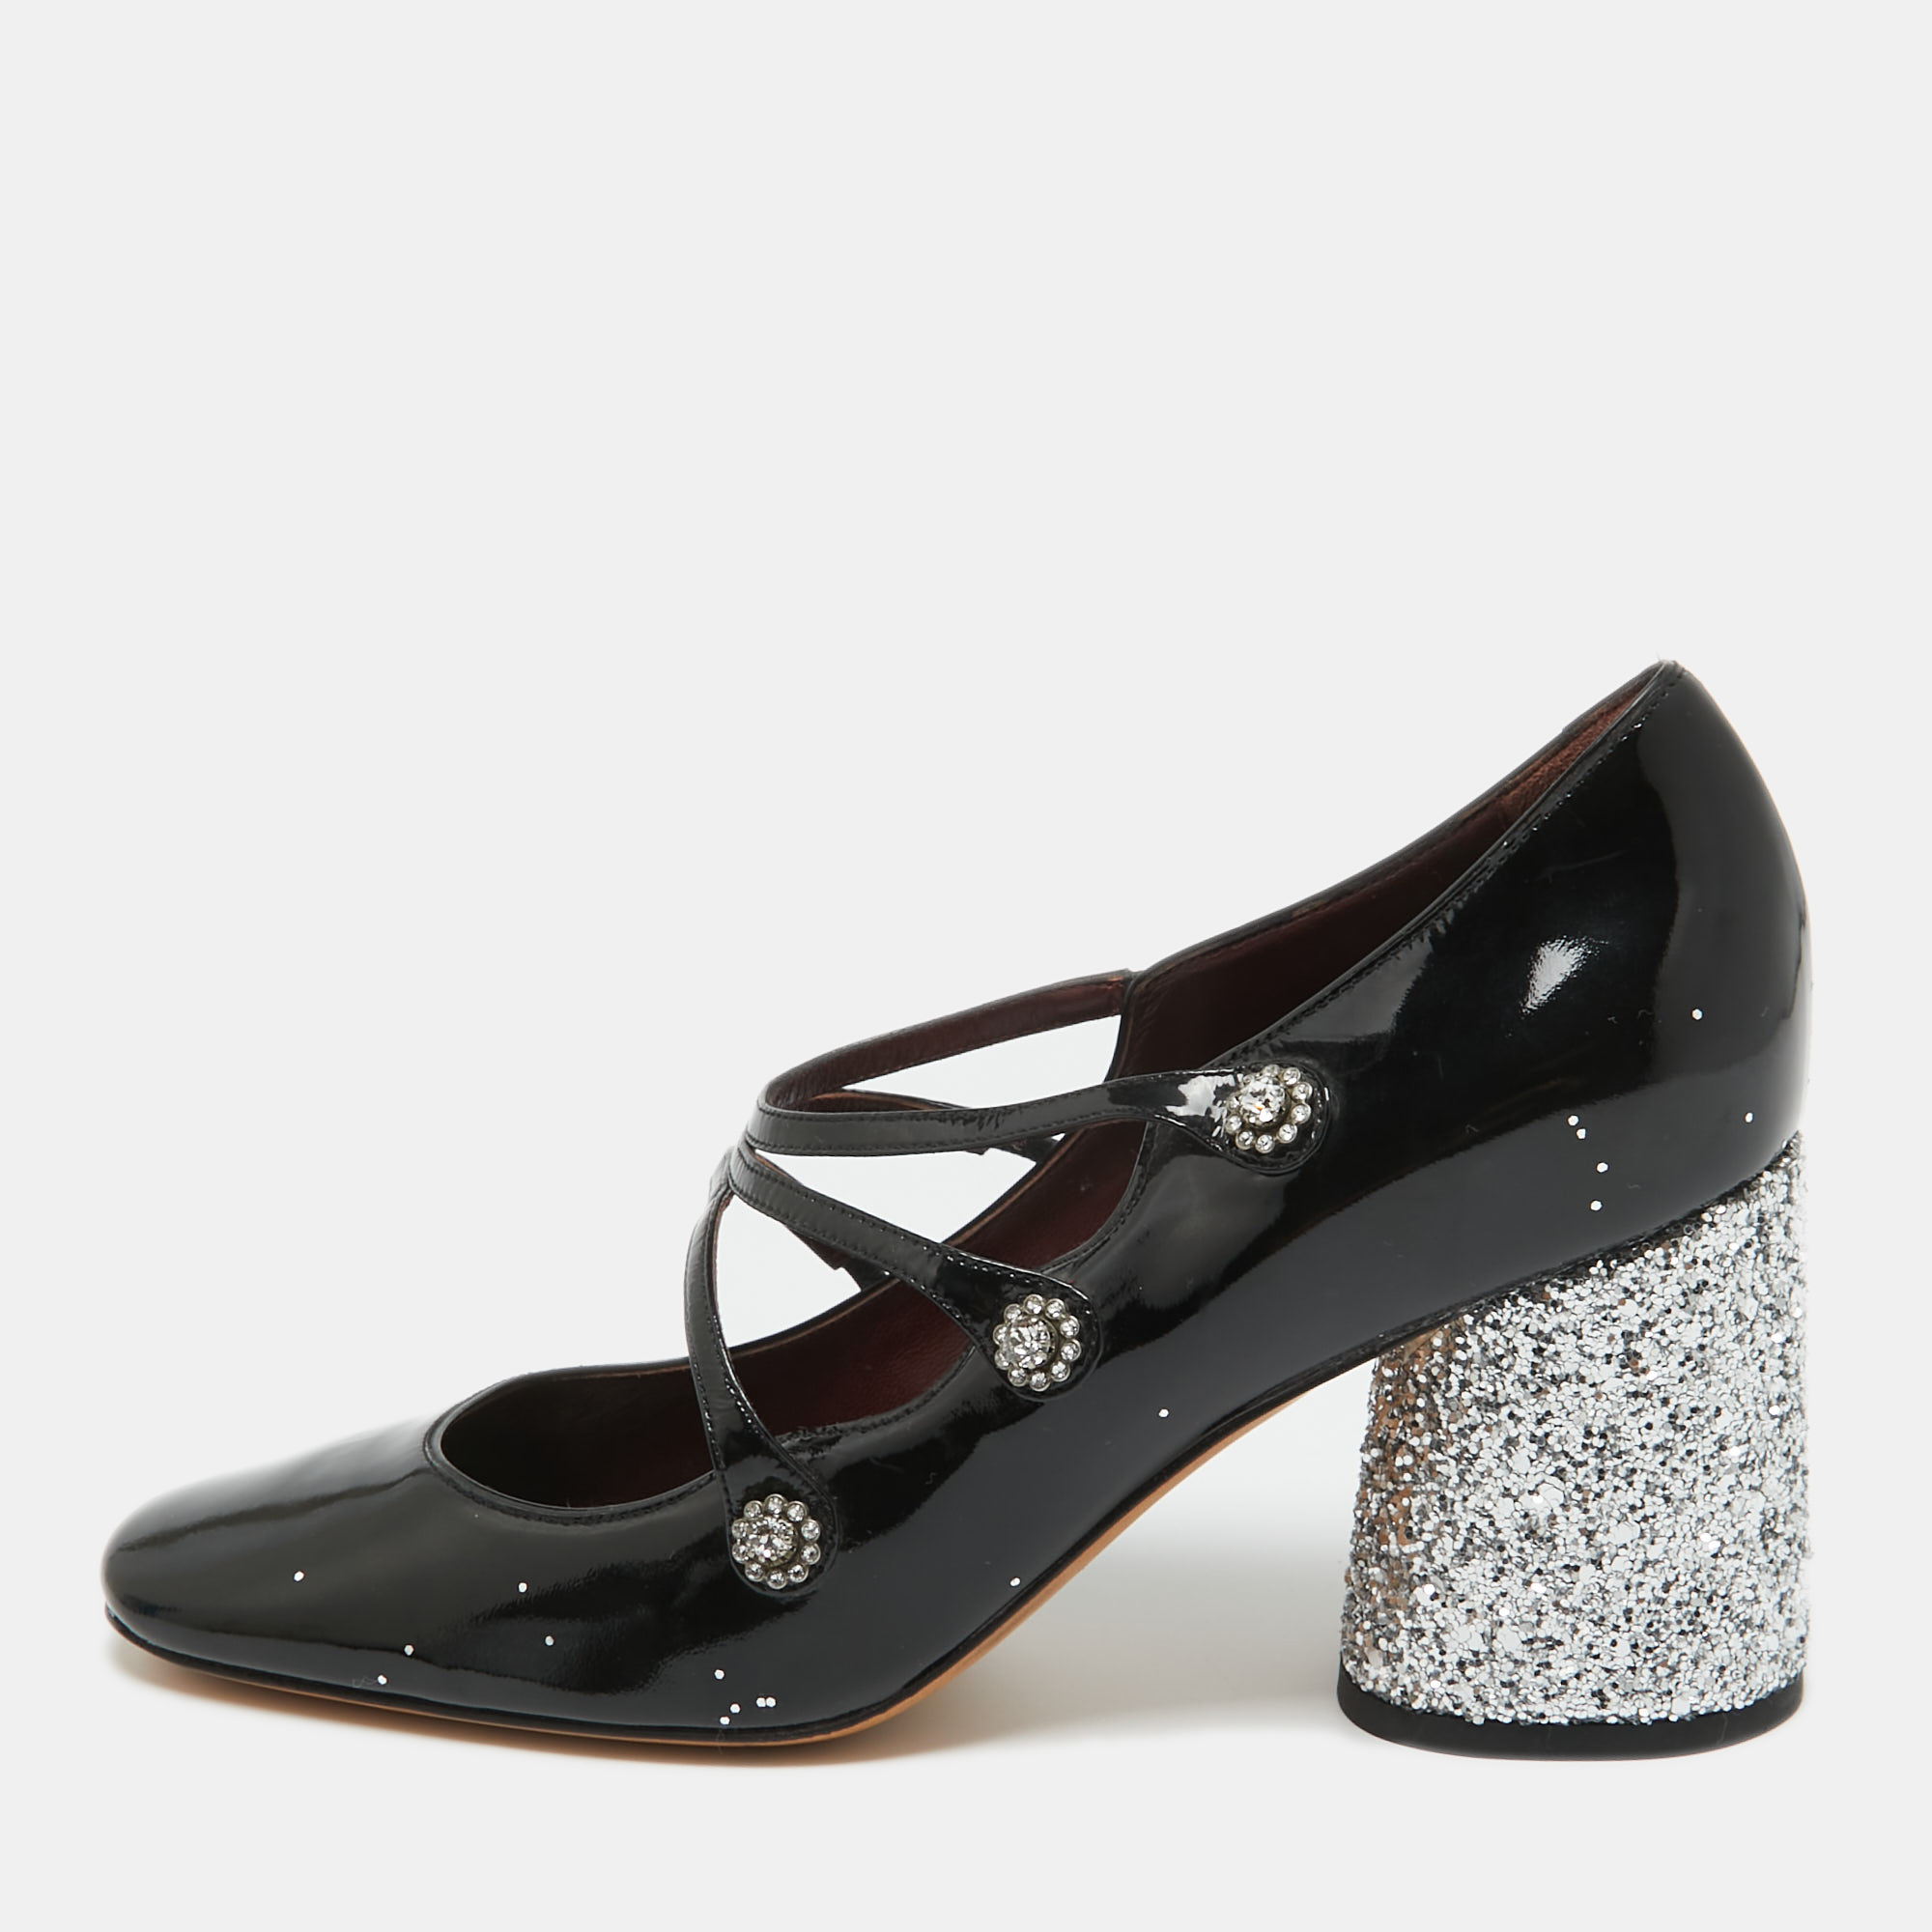 

Marc by Marc Jacobs Black Patent And Glitter Block Heel Pumps Size